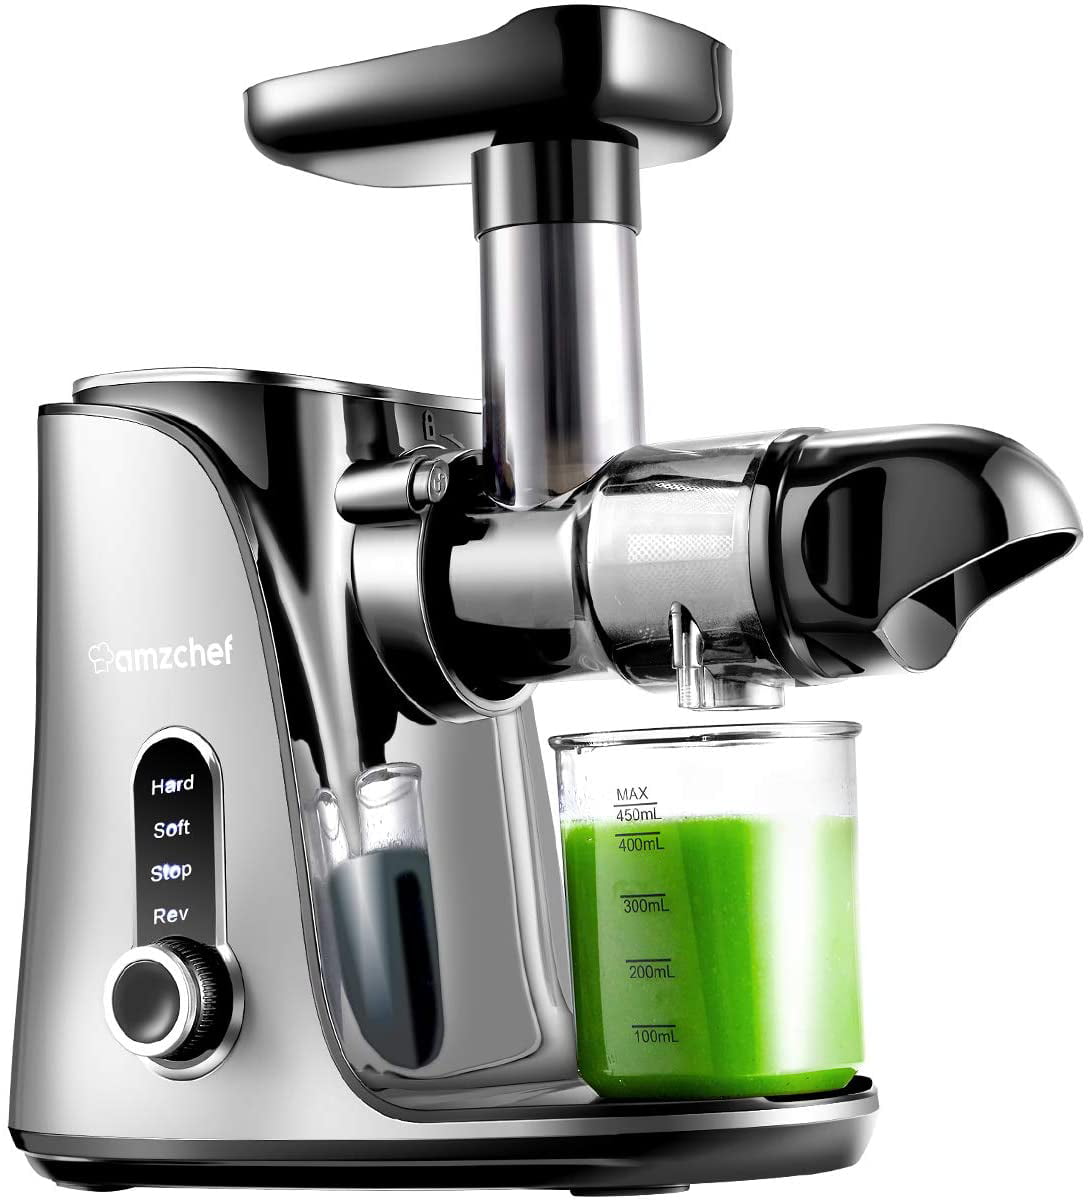 Masticating Juicer Keenray Slow Masticating Juicer Extractor Easy to Clean Quiet Motor Reverse Function For fruit & Vege Professional Cold Press Juicer Extractor with Brush 